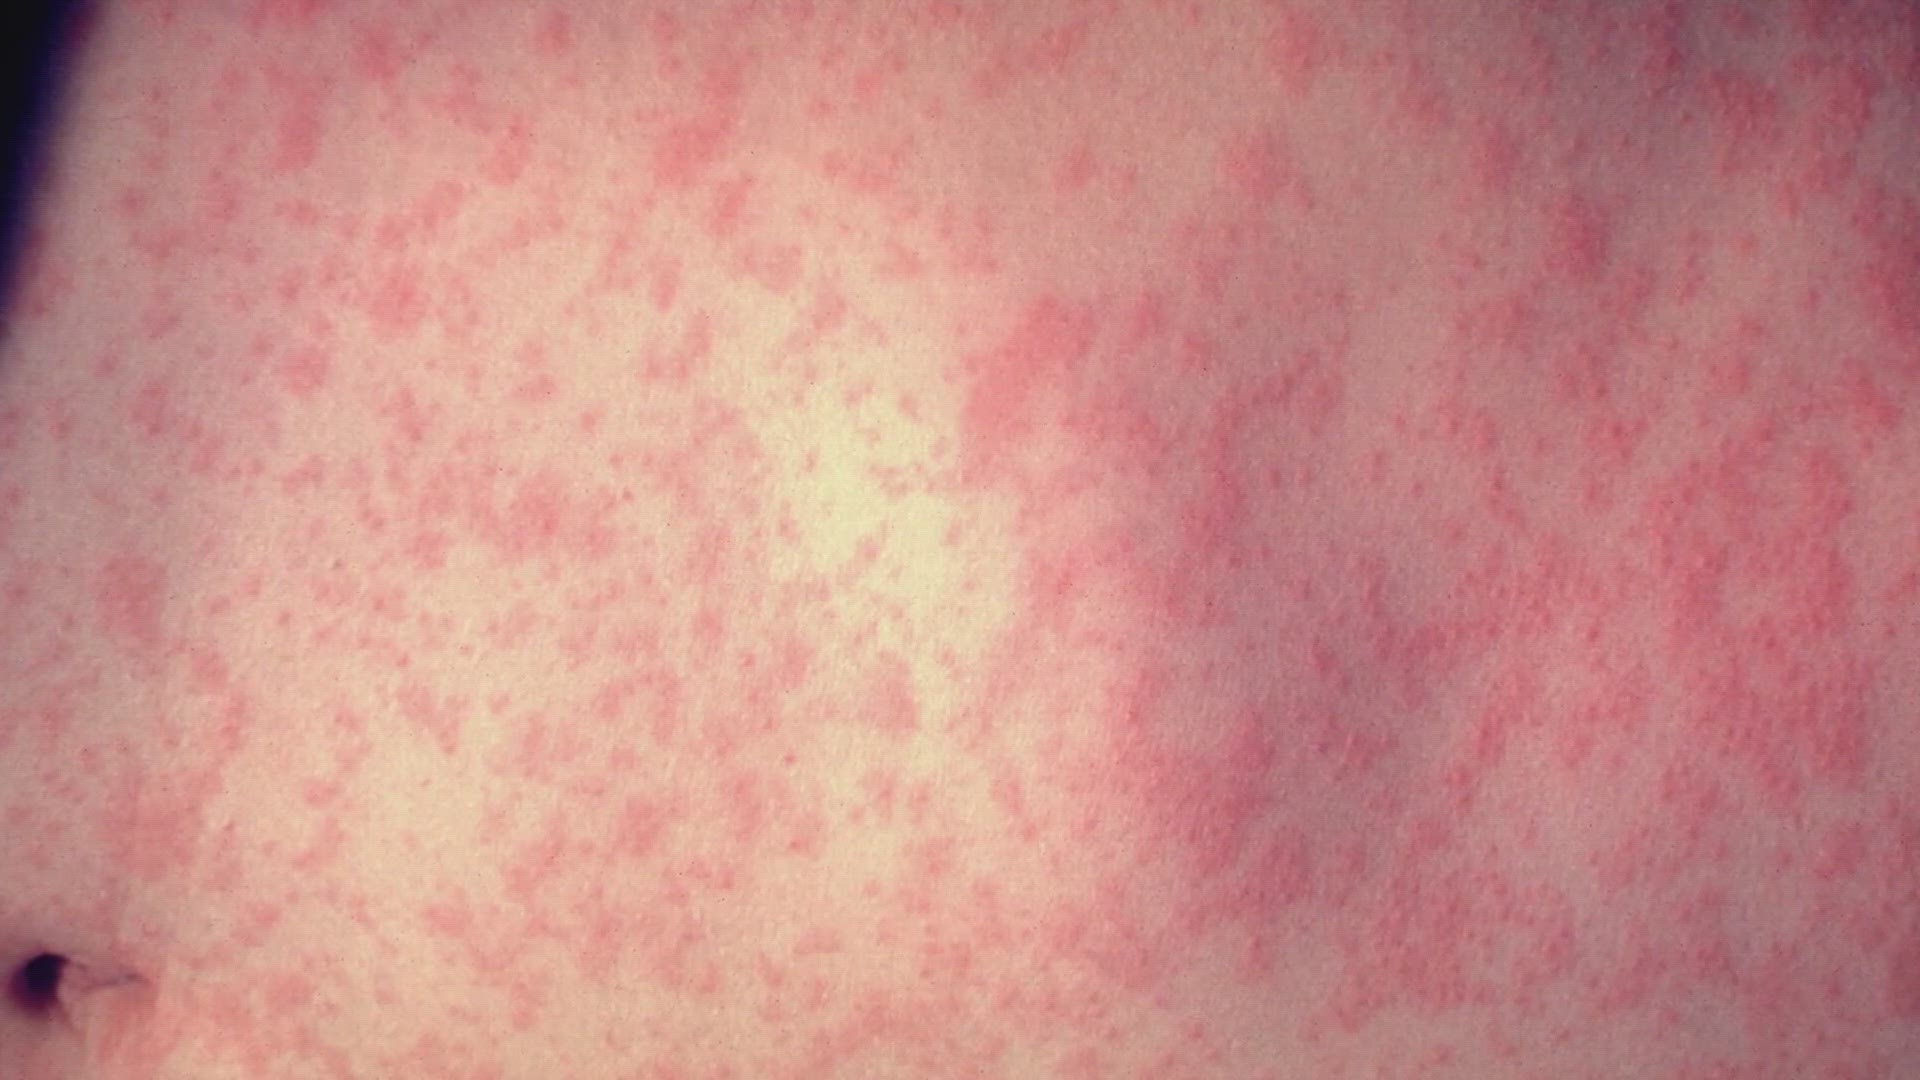 If cases continue to rise, measles could lose its 'elimination' status.